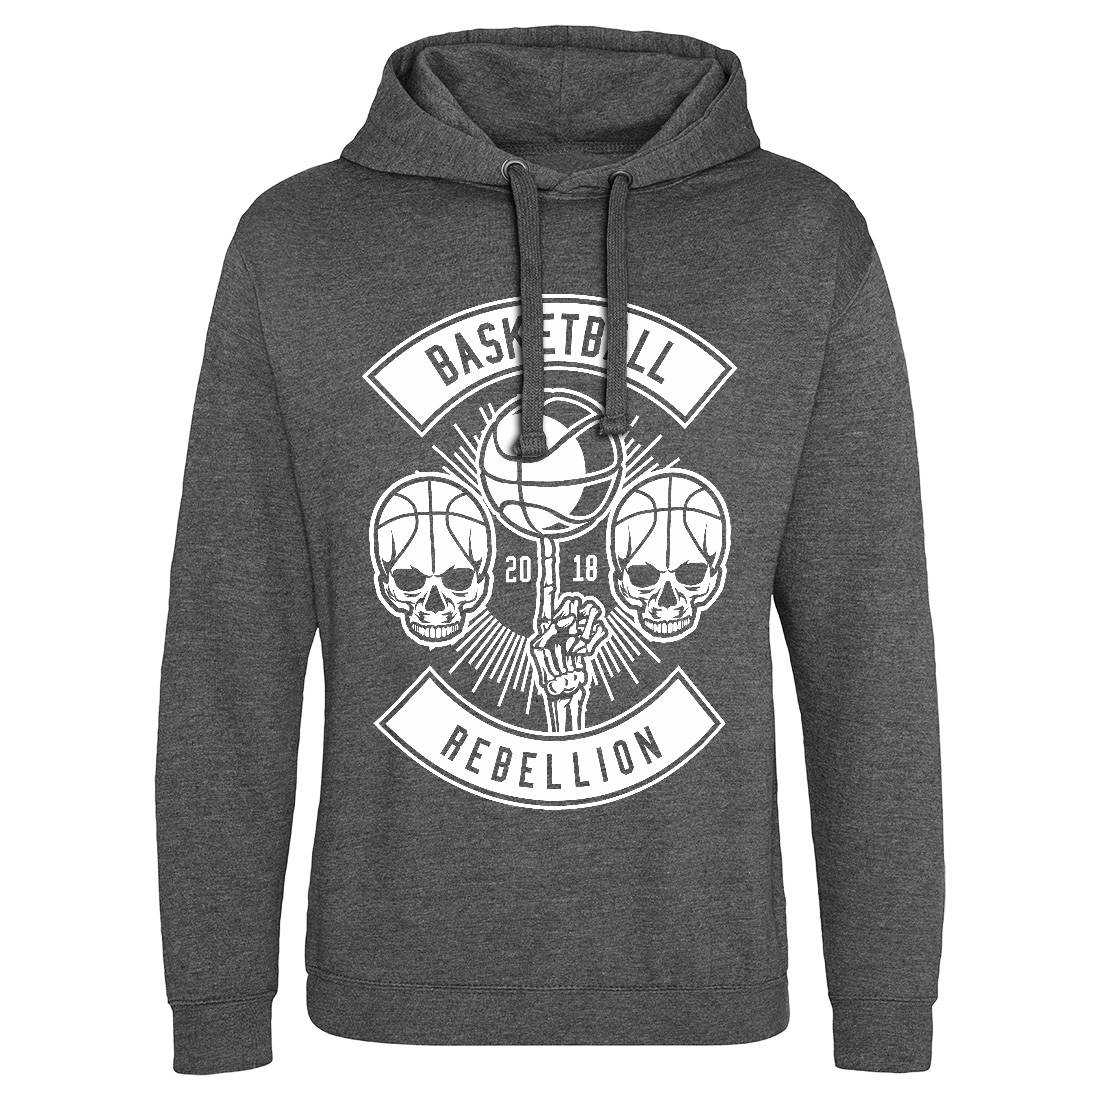 Basketball Rebellion Mens Hoodie Without Pocket Sport B492